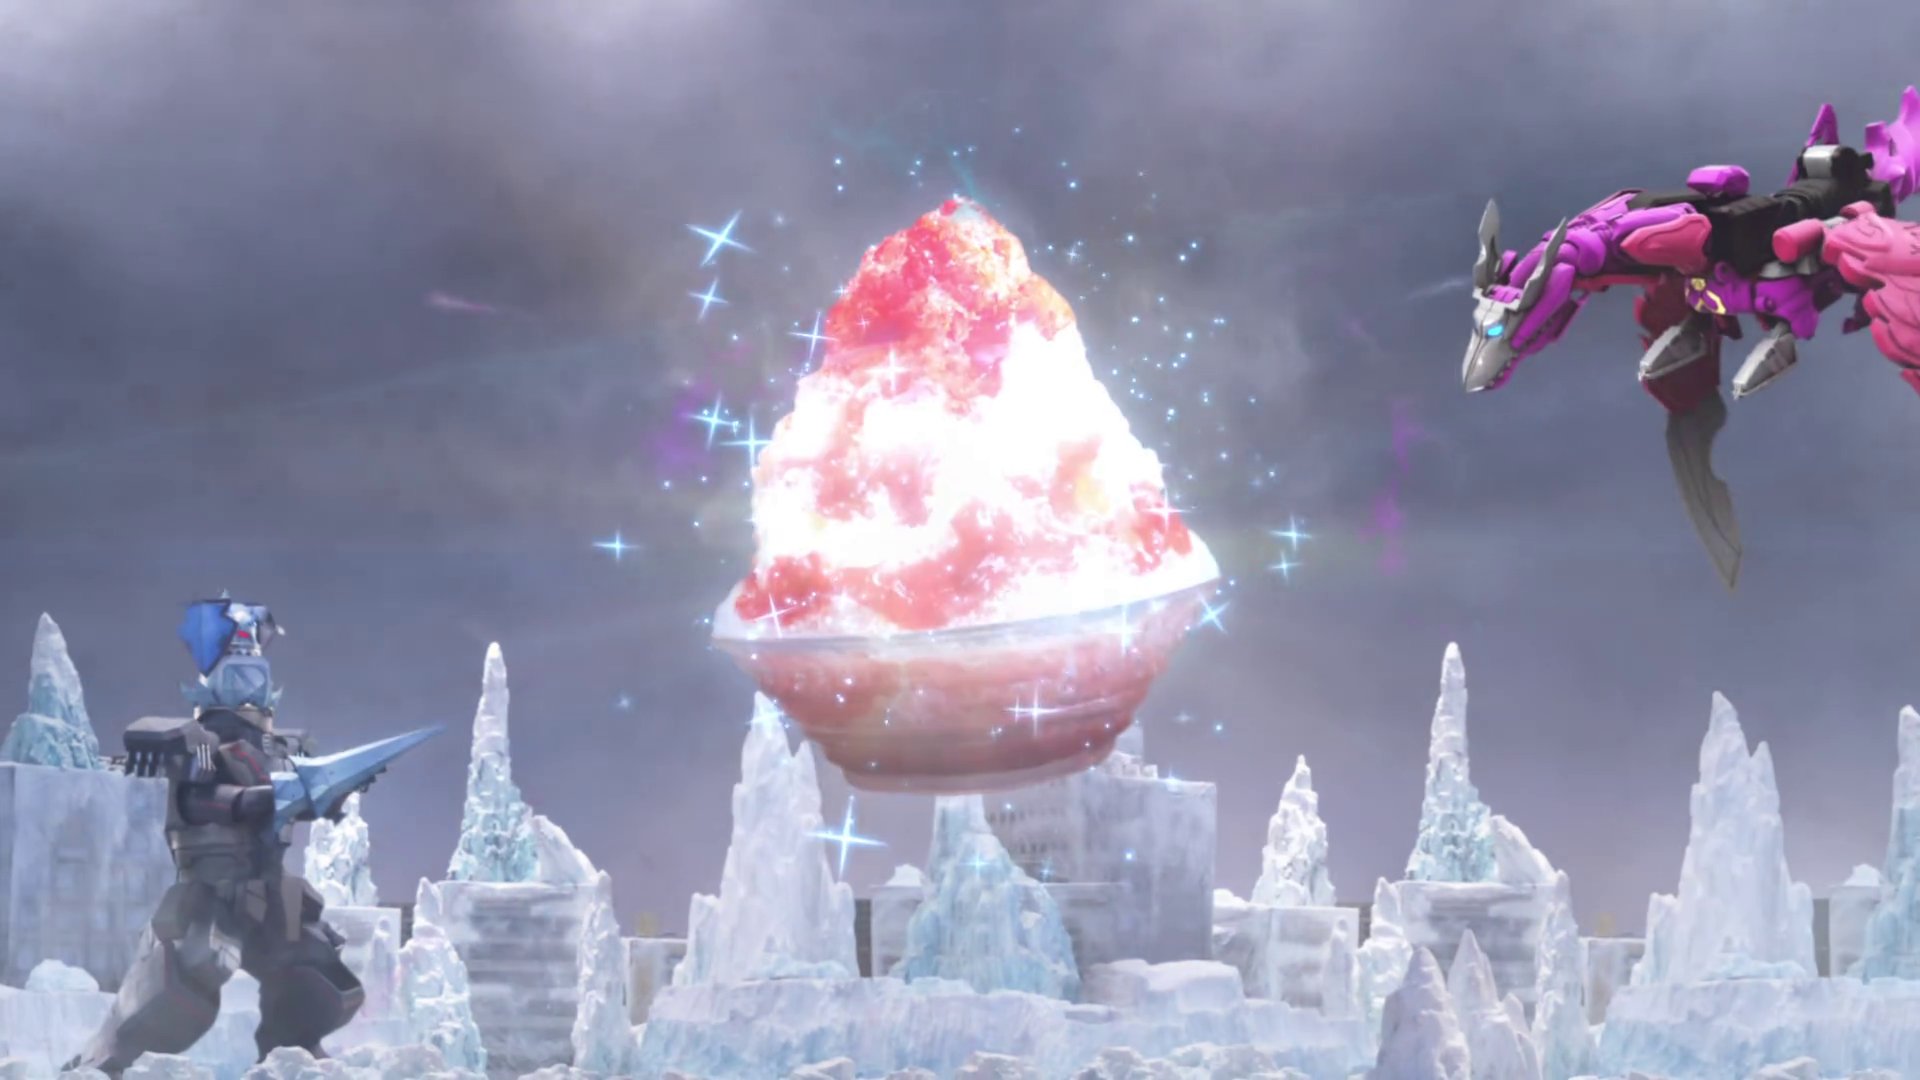 A pink dragon robot fighting the shaved ice monster in a frozen city with a giant floating bowl of red shaved ice between them.